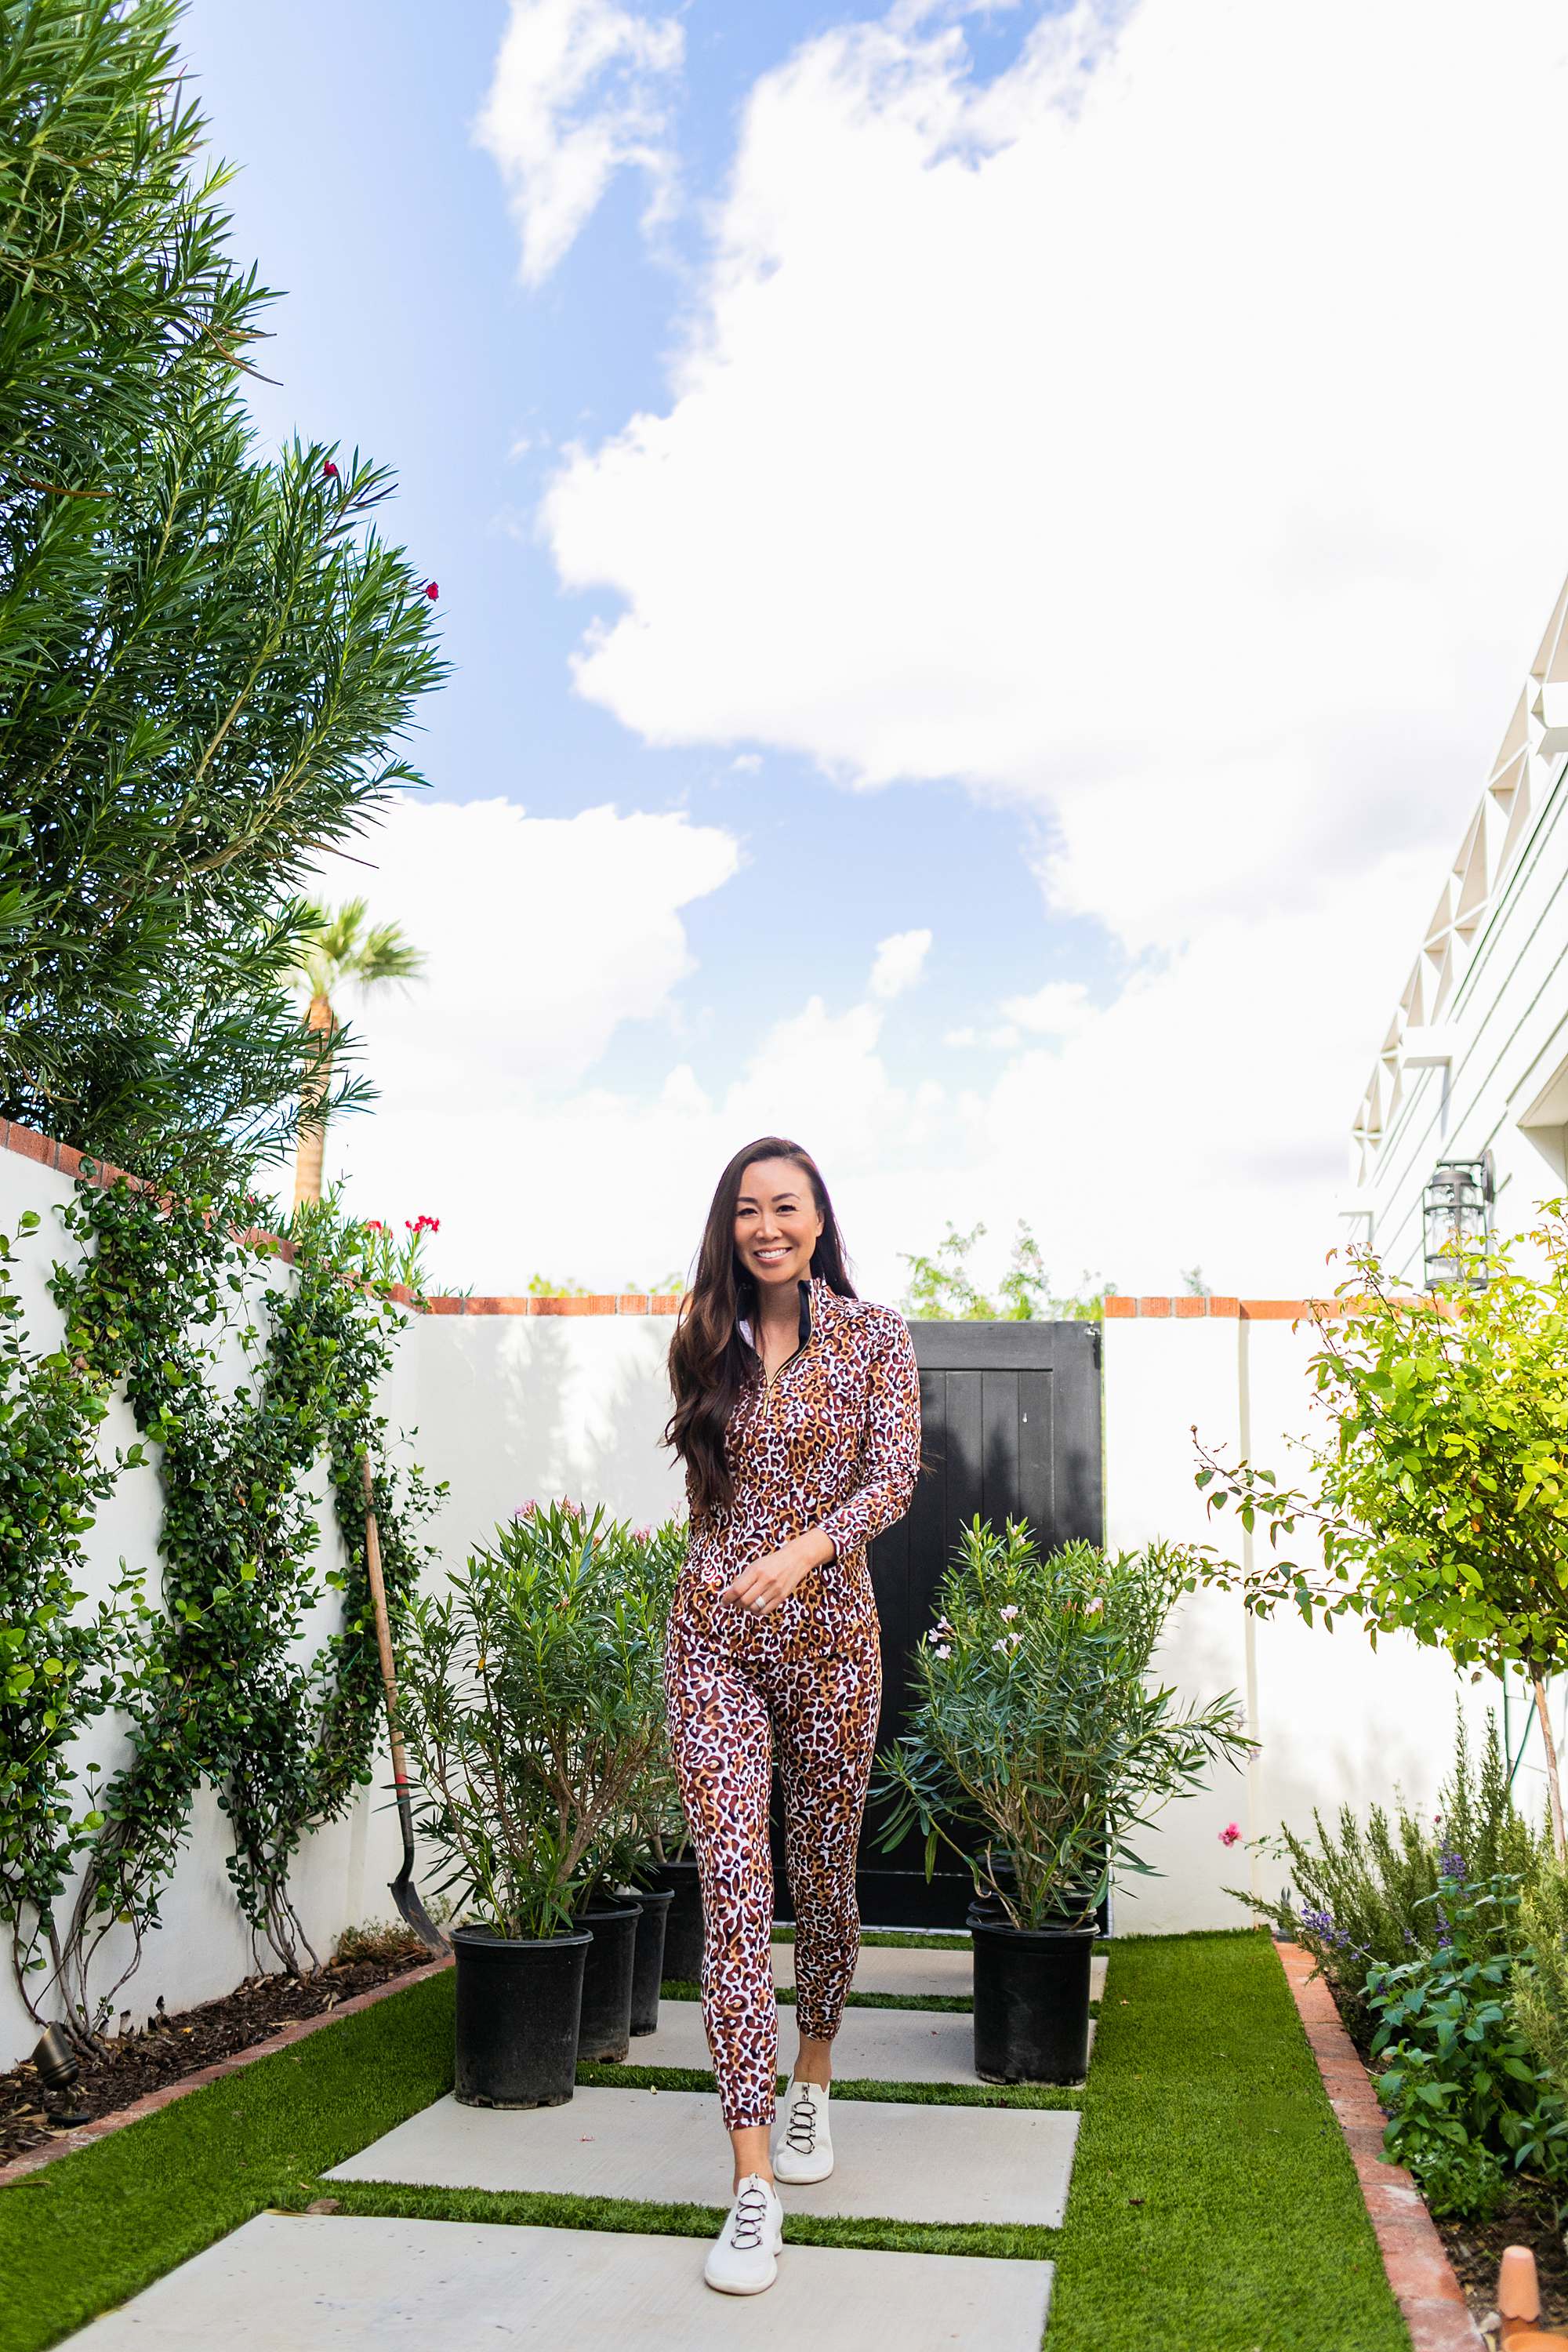 Phoenix garden blogger Diana Elizabeth wearing leopard print outfit head to toe Lilly Pulitzer UPF 50+ Luxletic Justine Pullover in Chocolate X Onyx My Favorite Spot